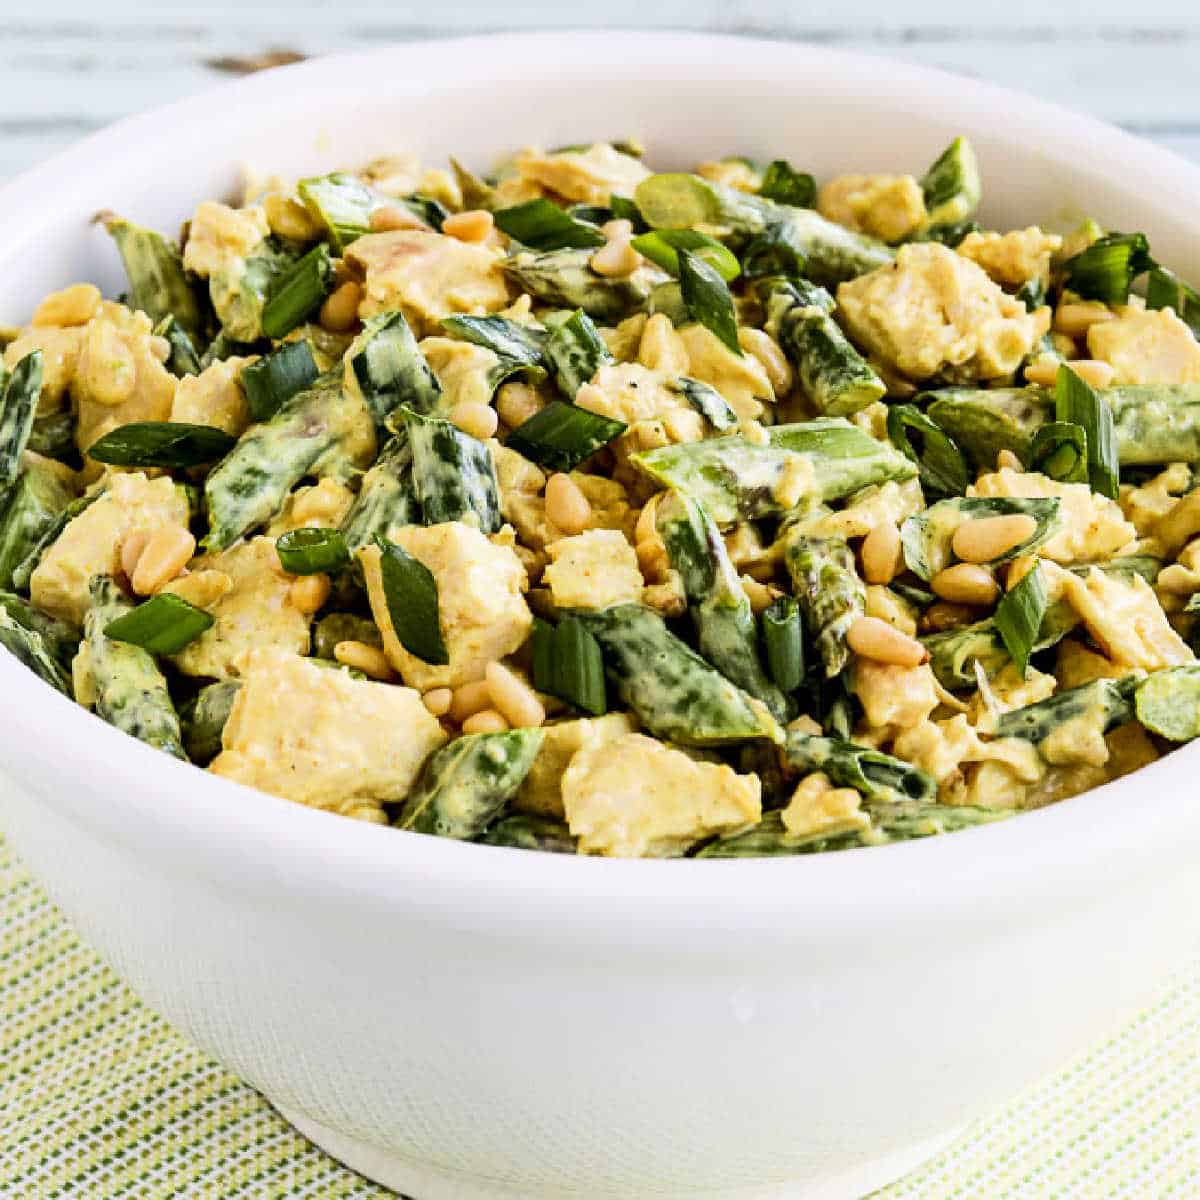 Square image for Curried Chicken Salad with Asparagus and Pine Nuts shown in white bowl. 